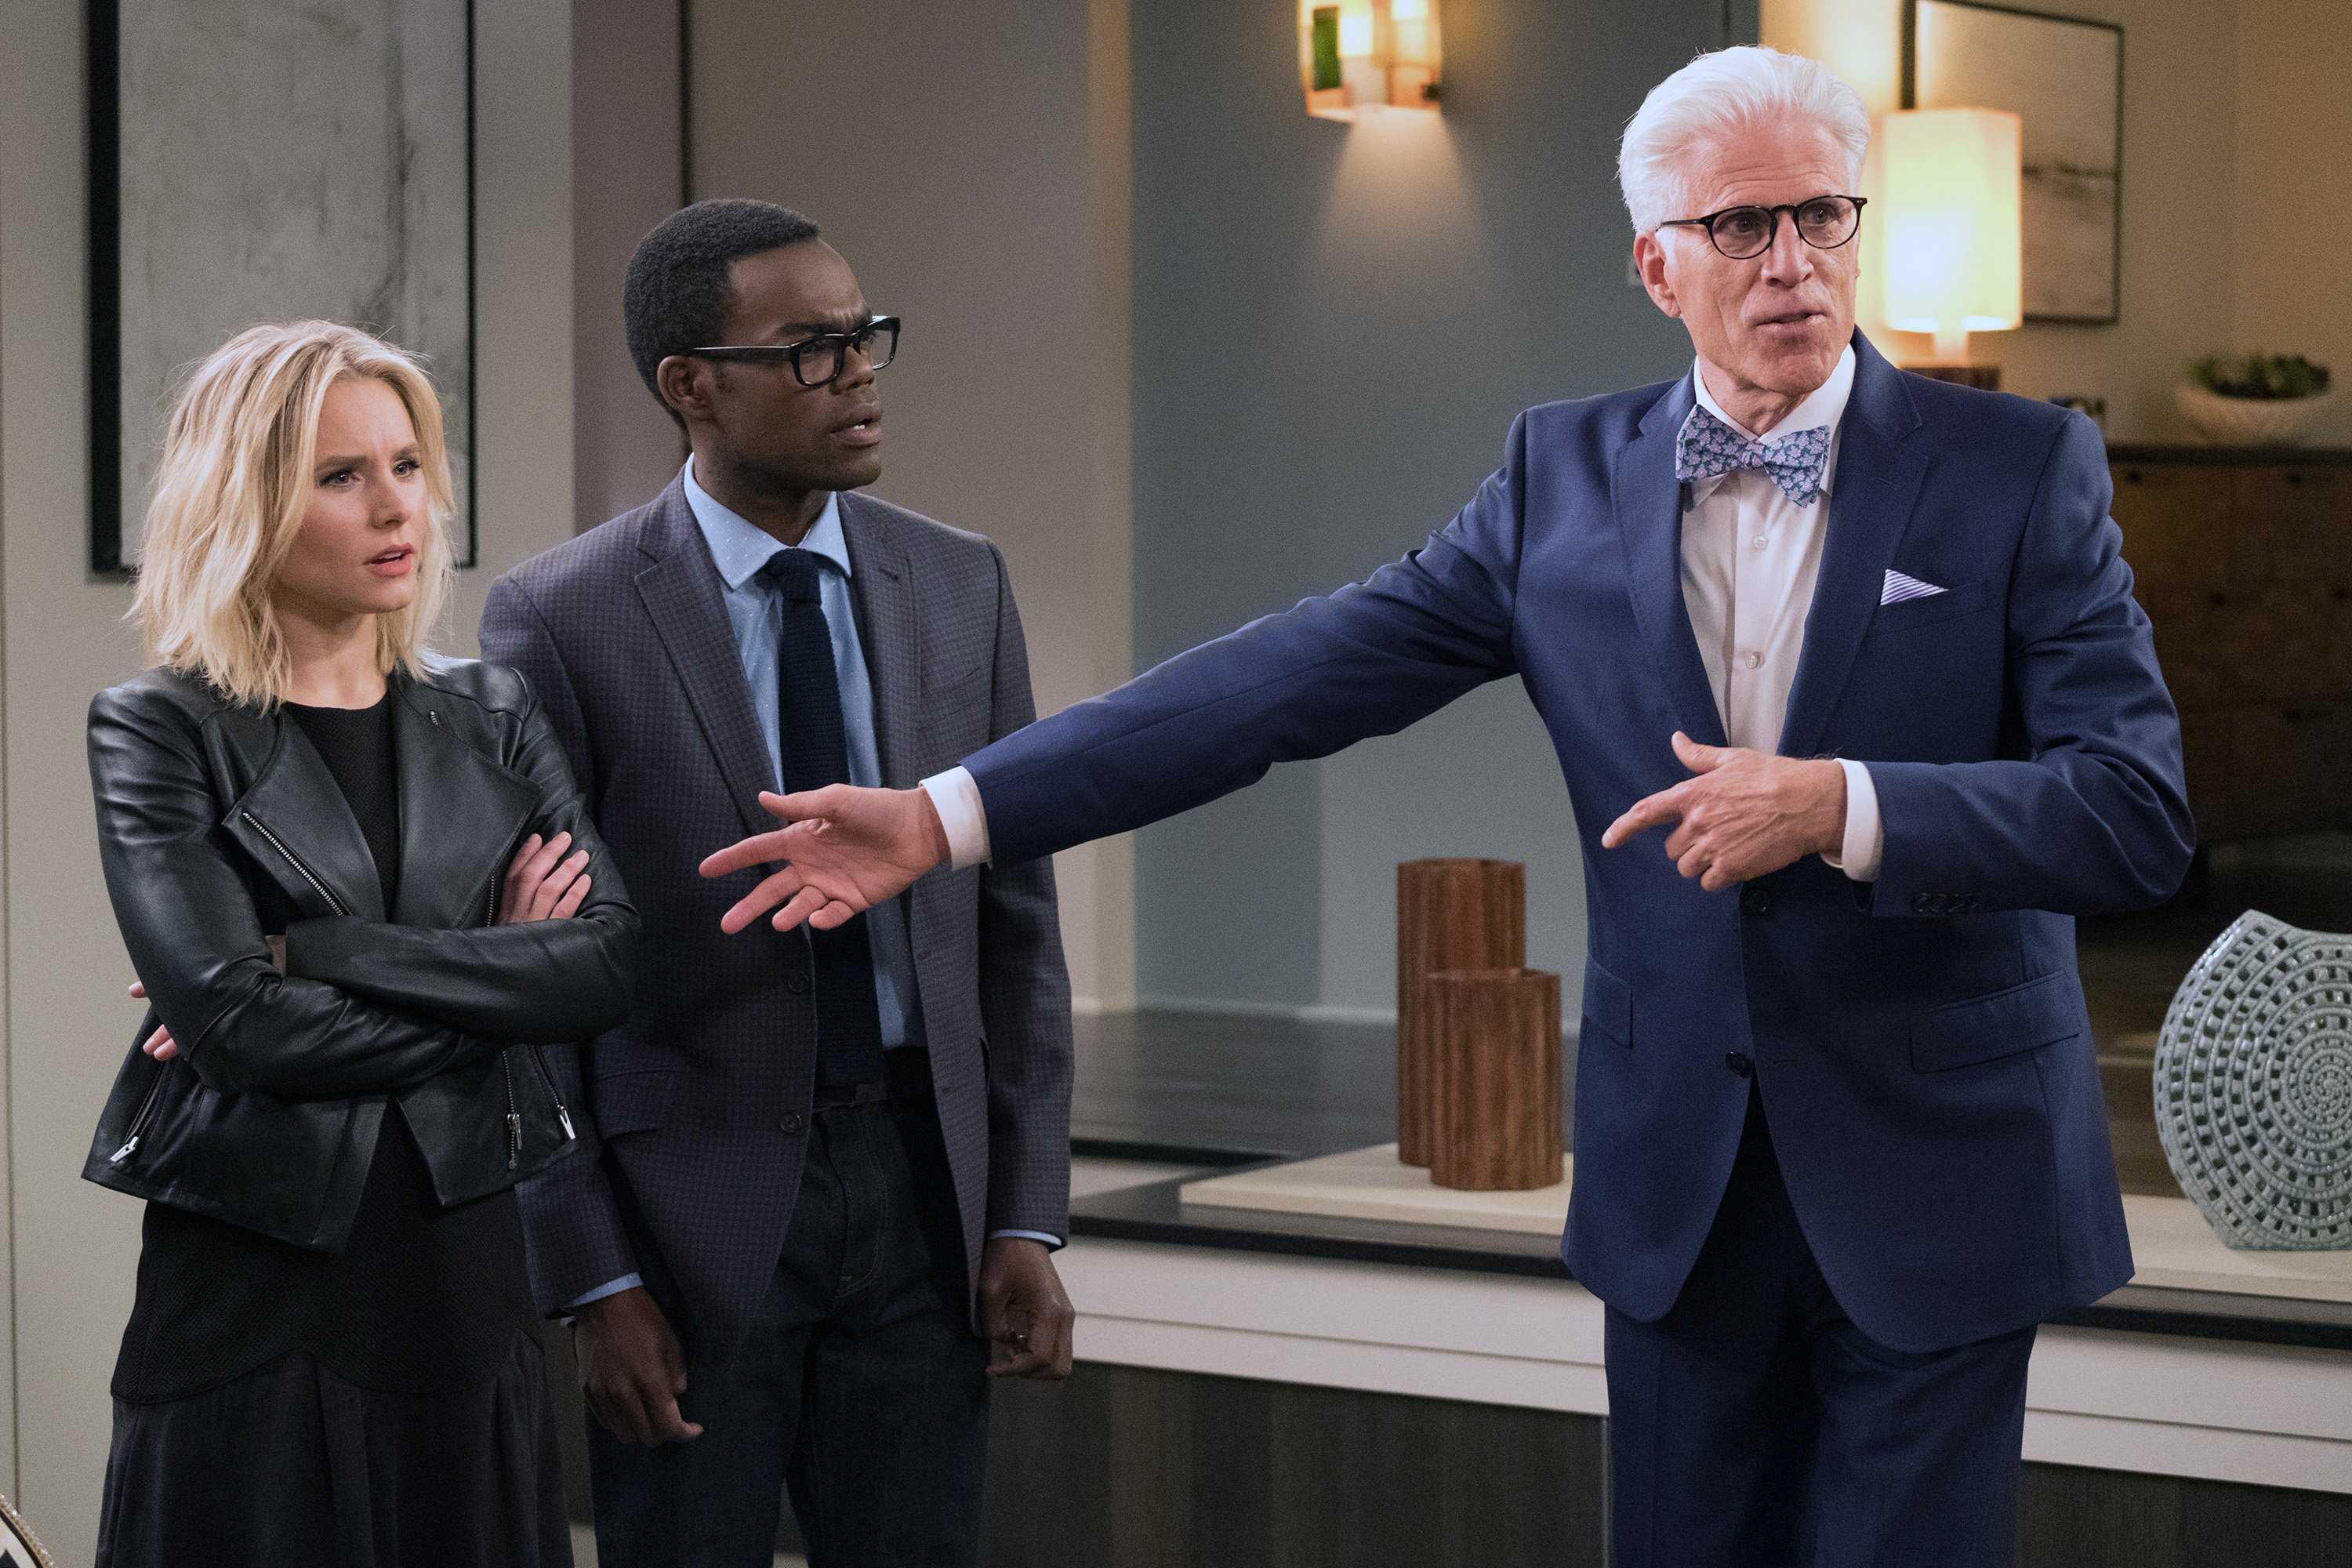 'The Good Place' stars Kristen Bell, William Jackson Harper, and Ted Danson